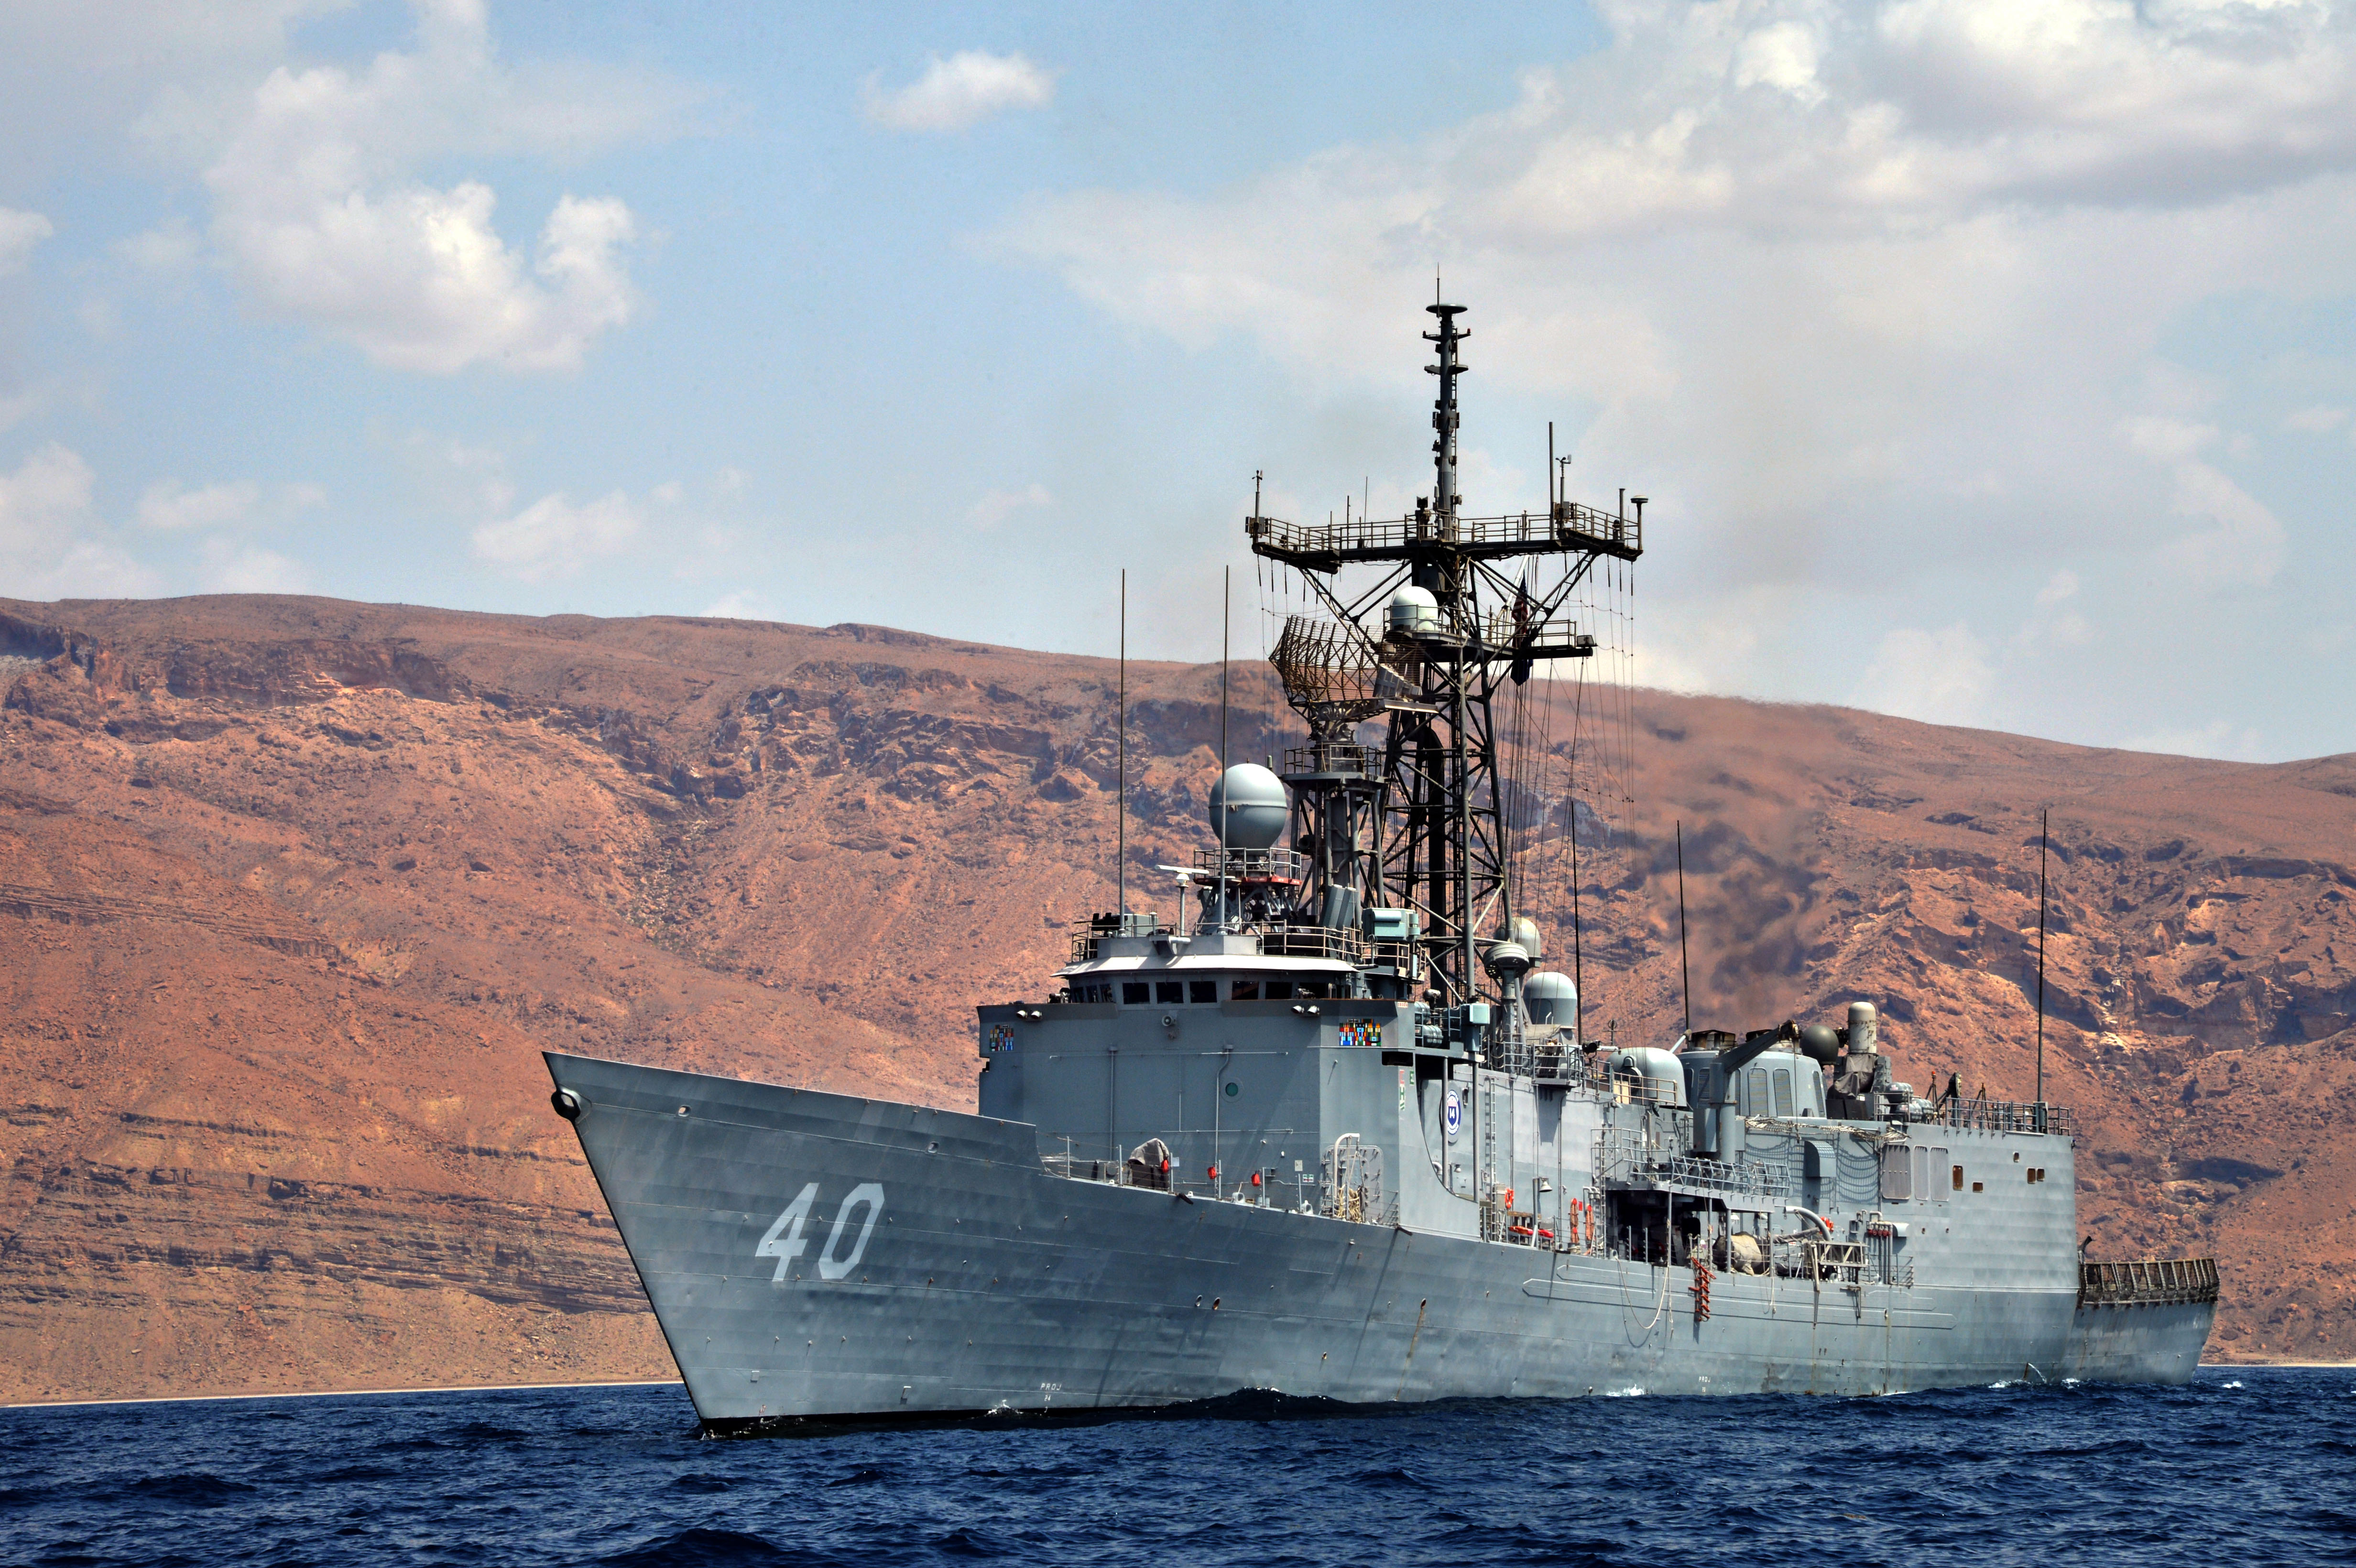 FFG Oliver Hazard Perry Class Guided Missile Frigate